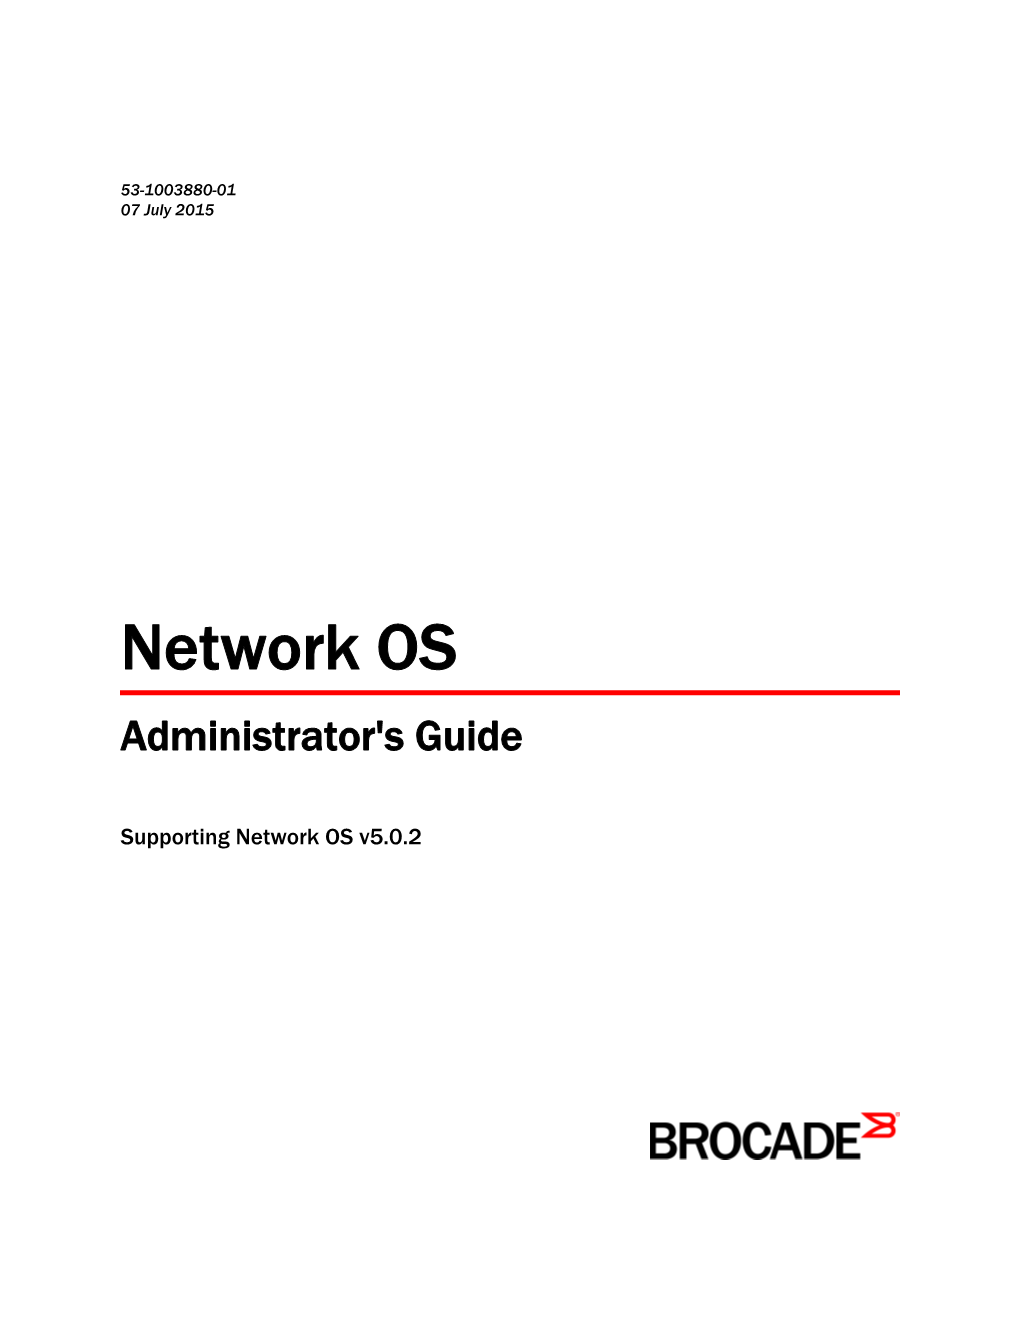 Network OS Administrator's Guide